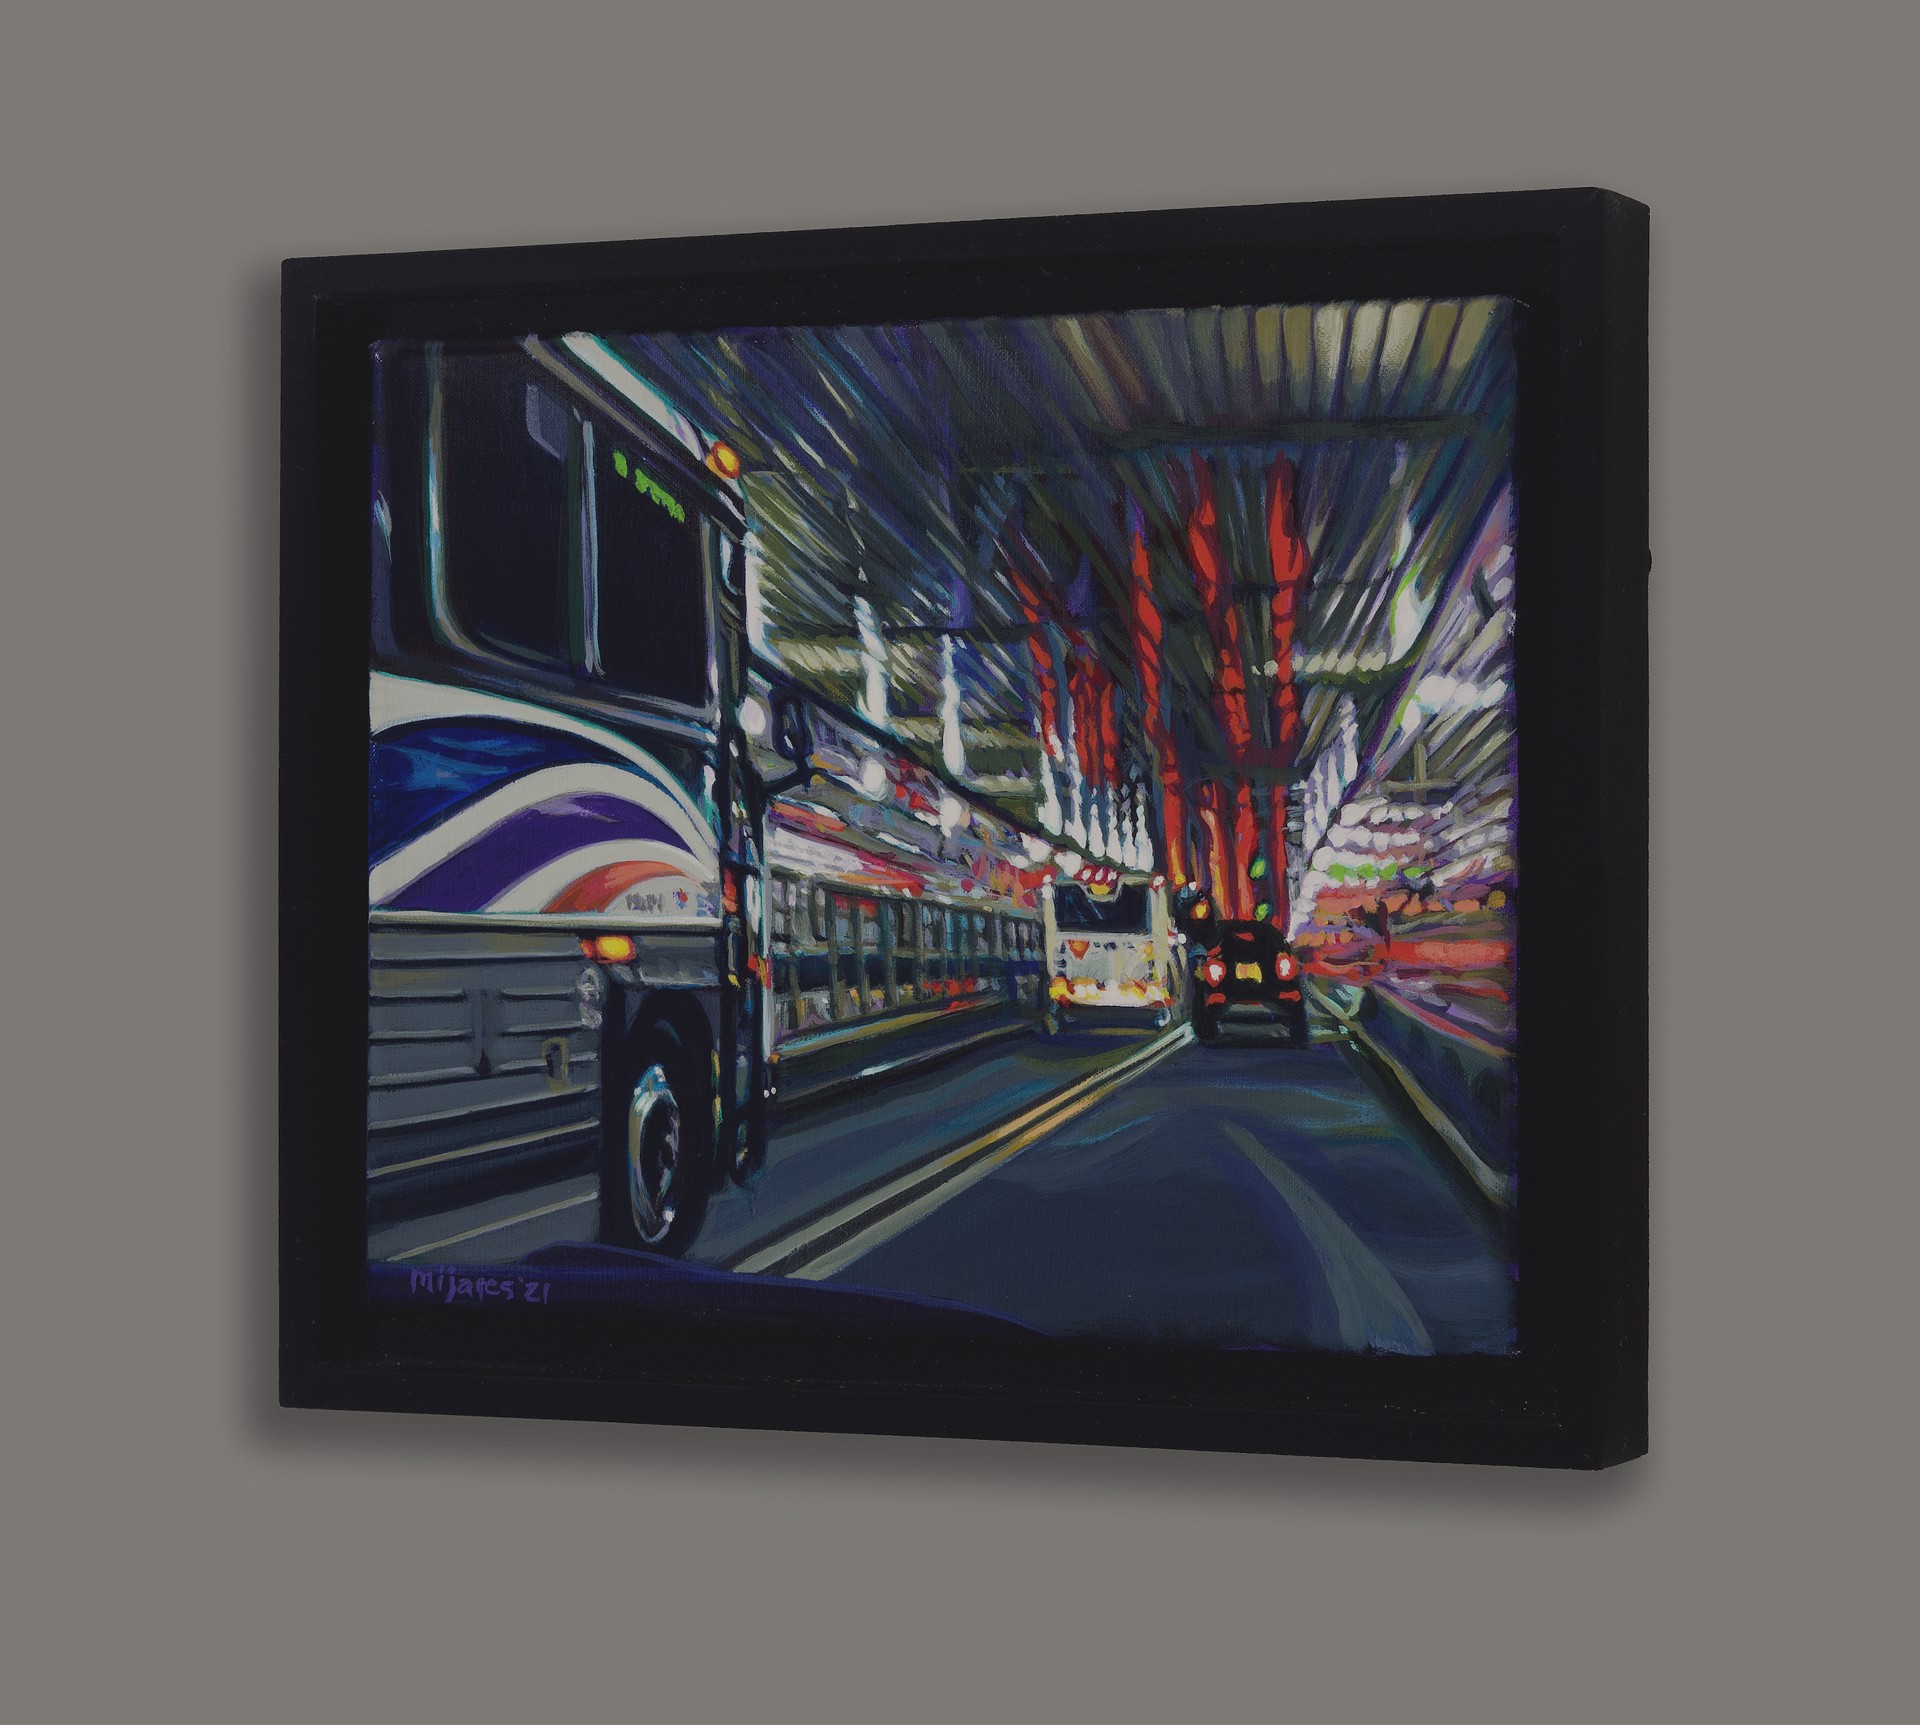 Lincoln Tunnel (Bus) by Maria Mijares